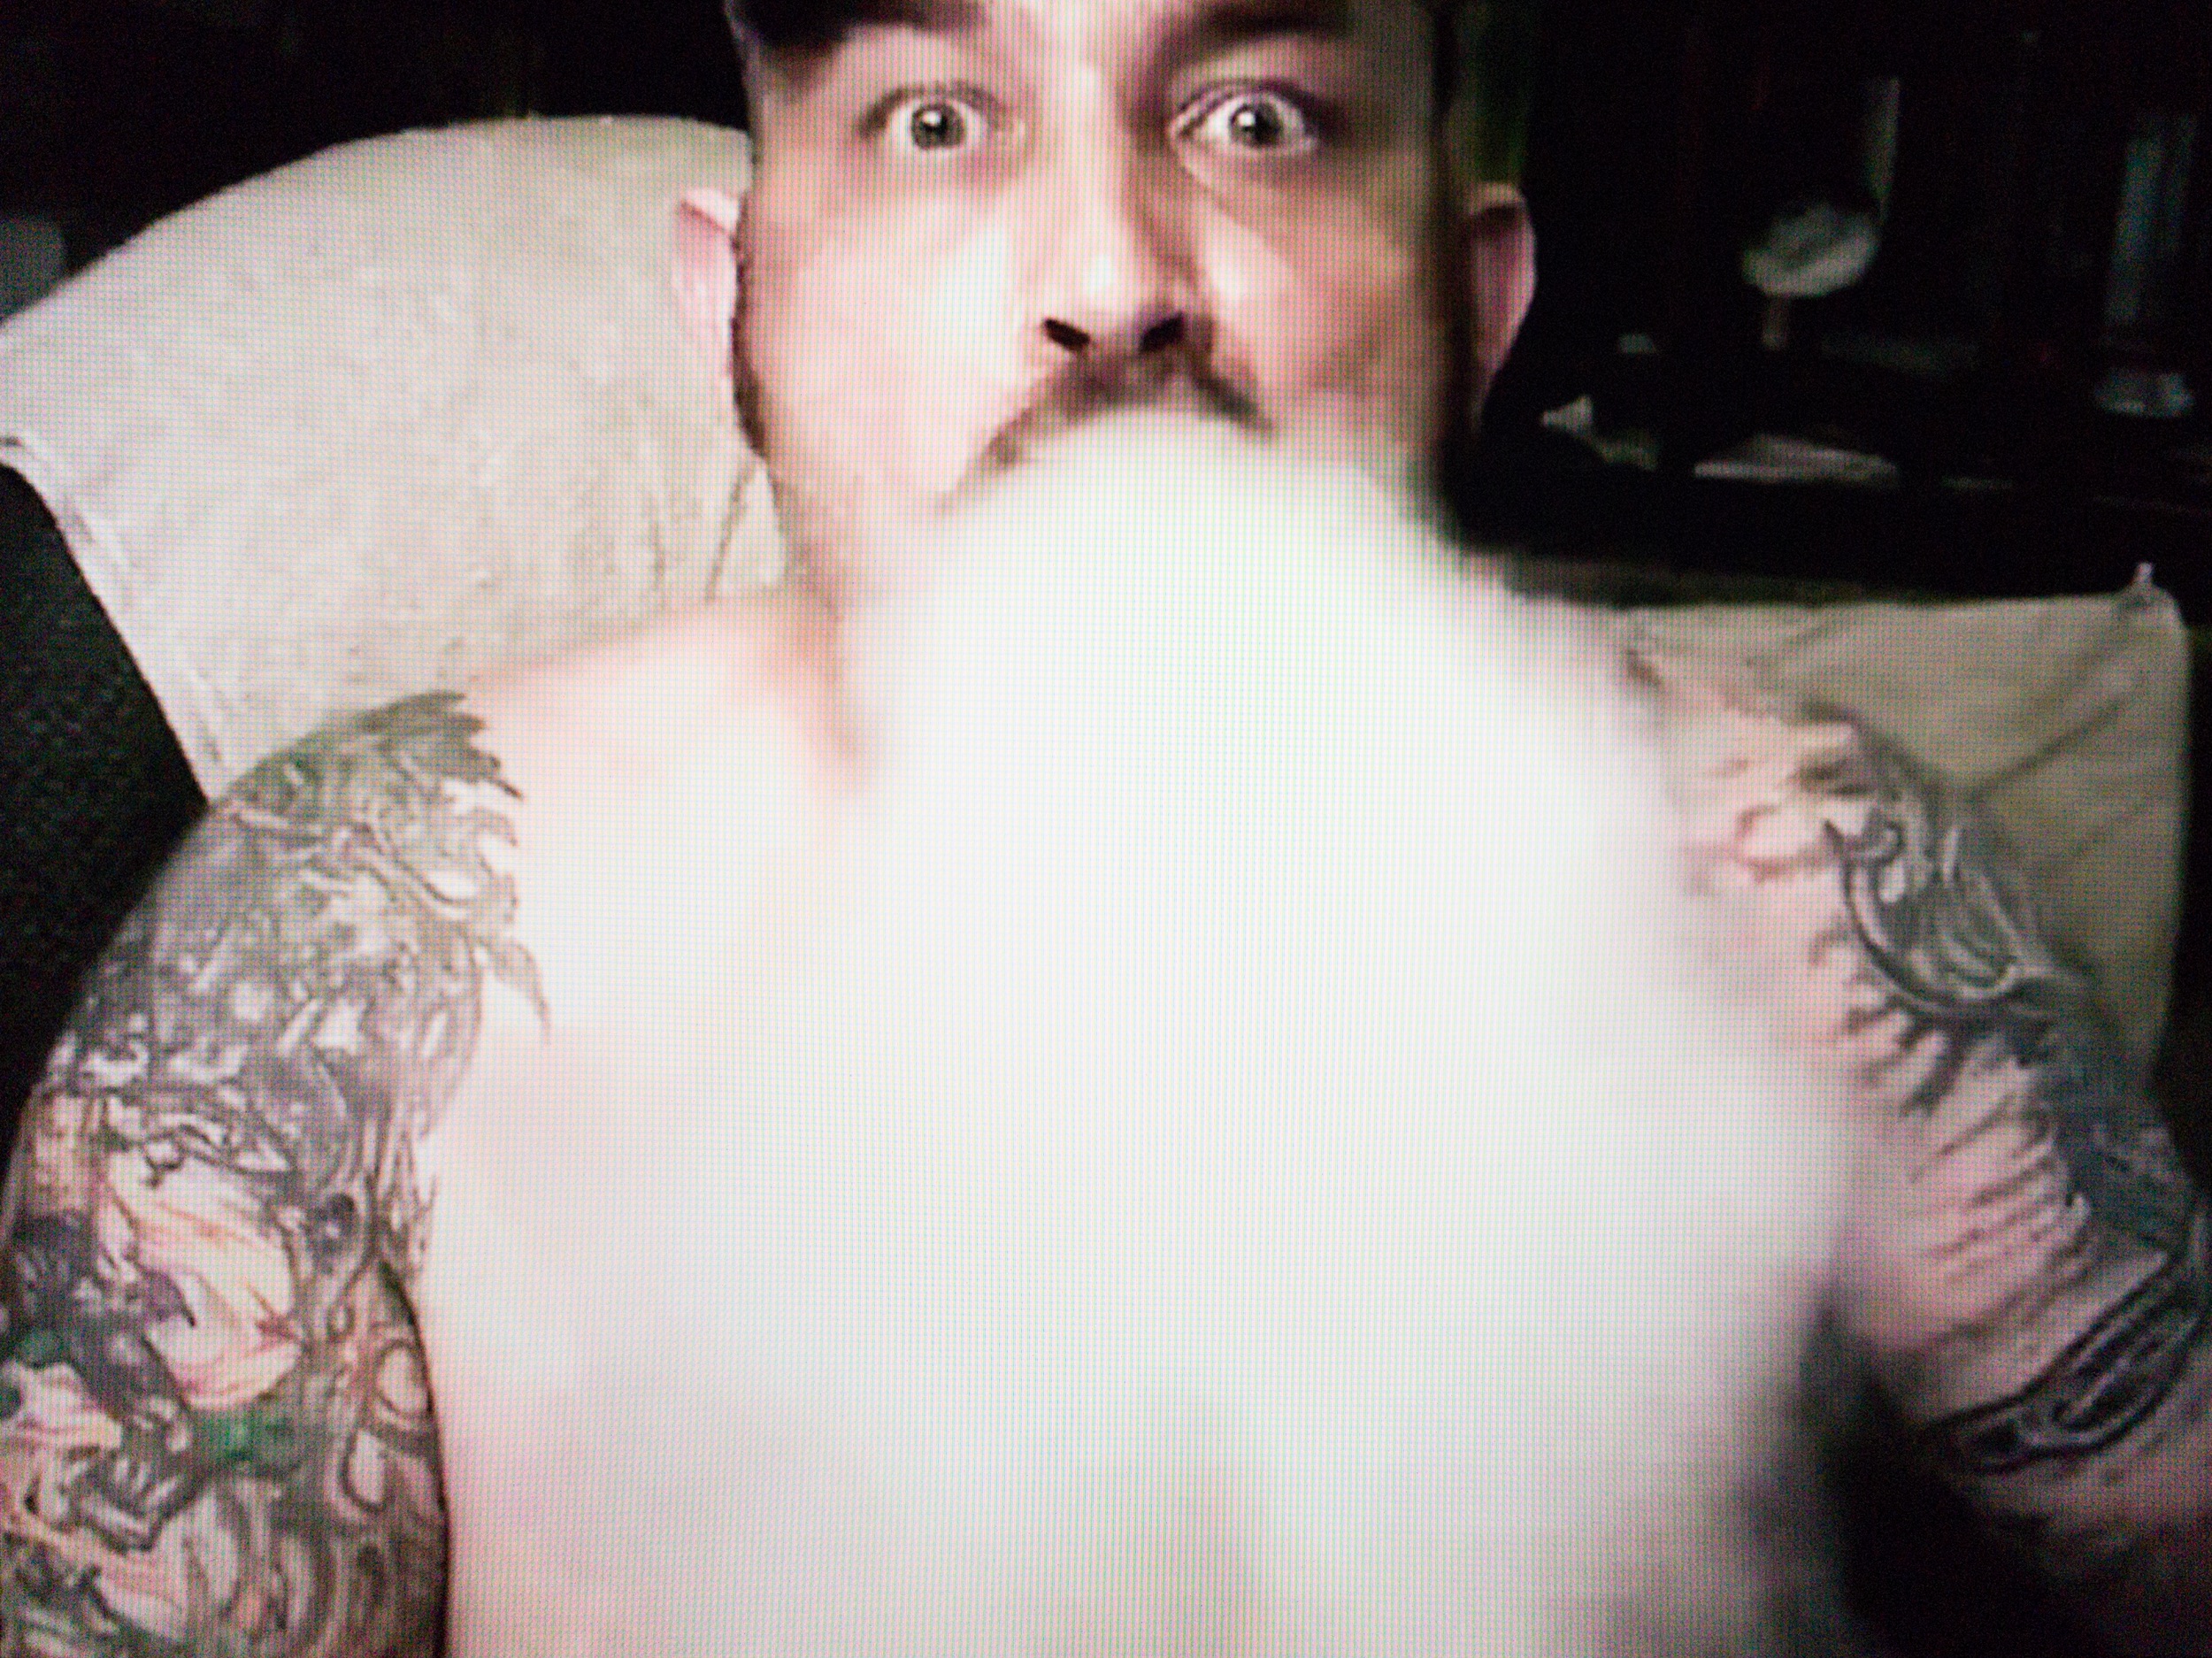 A bare-chested, bearded man with tattoos on arms and shoulders is looking straight at us with both eyes wide open, while exhaling a large volume of smoke that covers his entire chest.